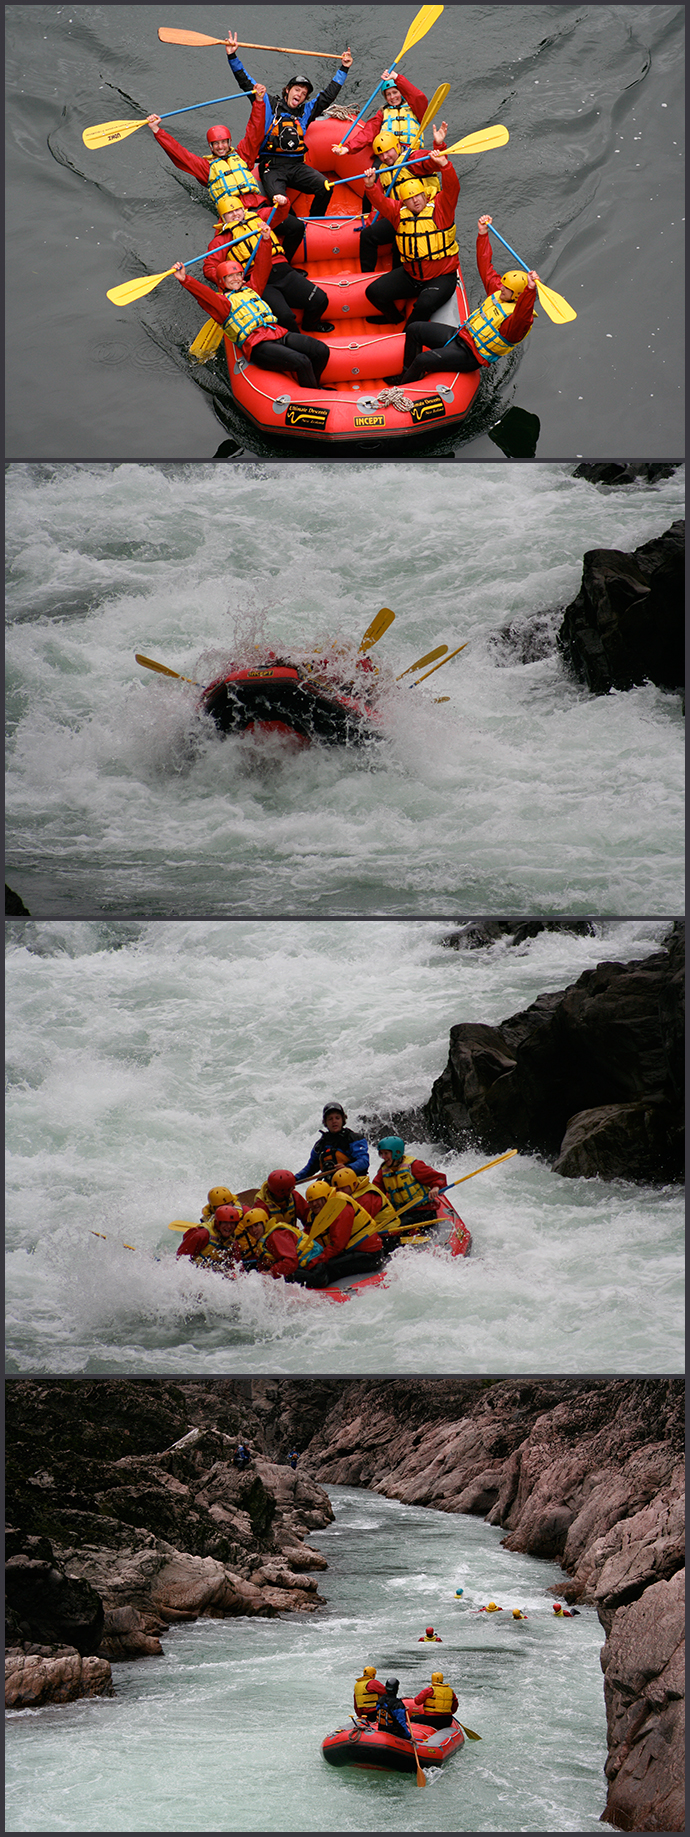 These shots were taken by our Rafting co.  Had a blast but it was flippin' cold!